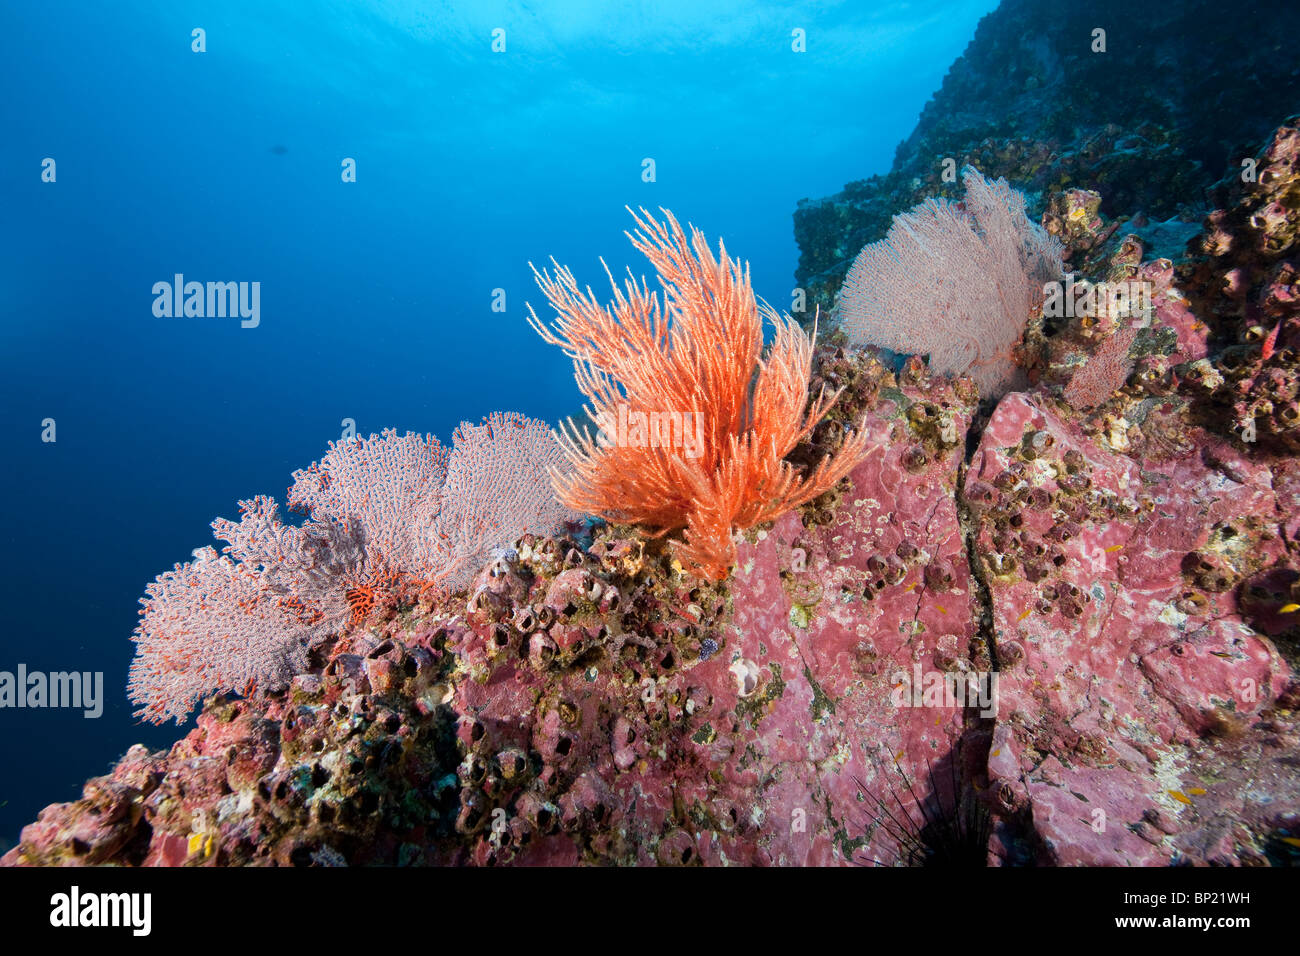 Coral growing at Reef, Malpelo, East Pacific Ocean, Colombia Stock Photo